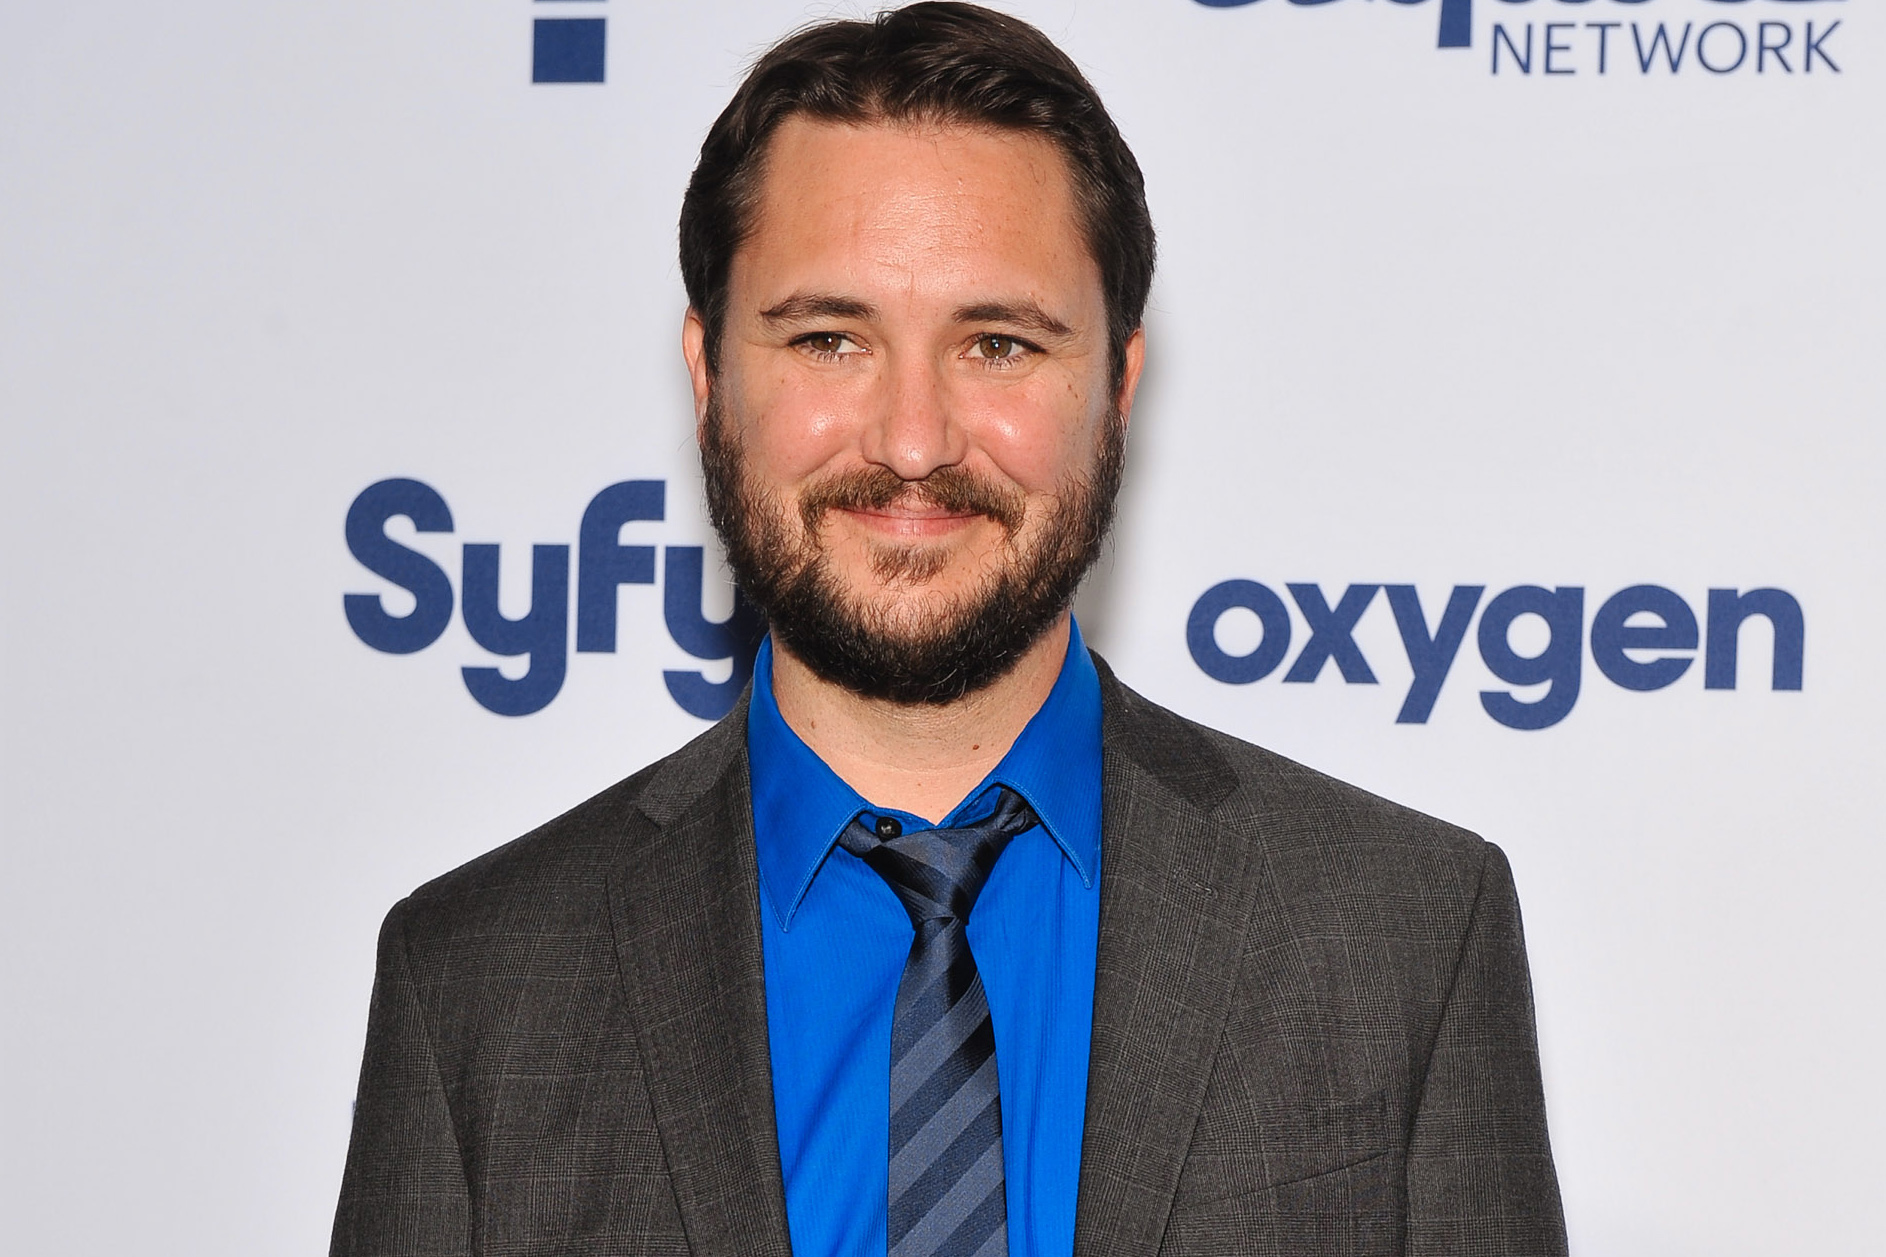 Wil Wheaton Backgrounds, Compatible - PC, Mobile, Gadgets| 1886x1257 px